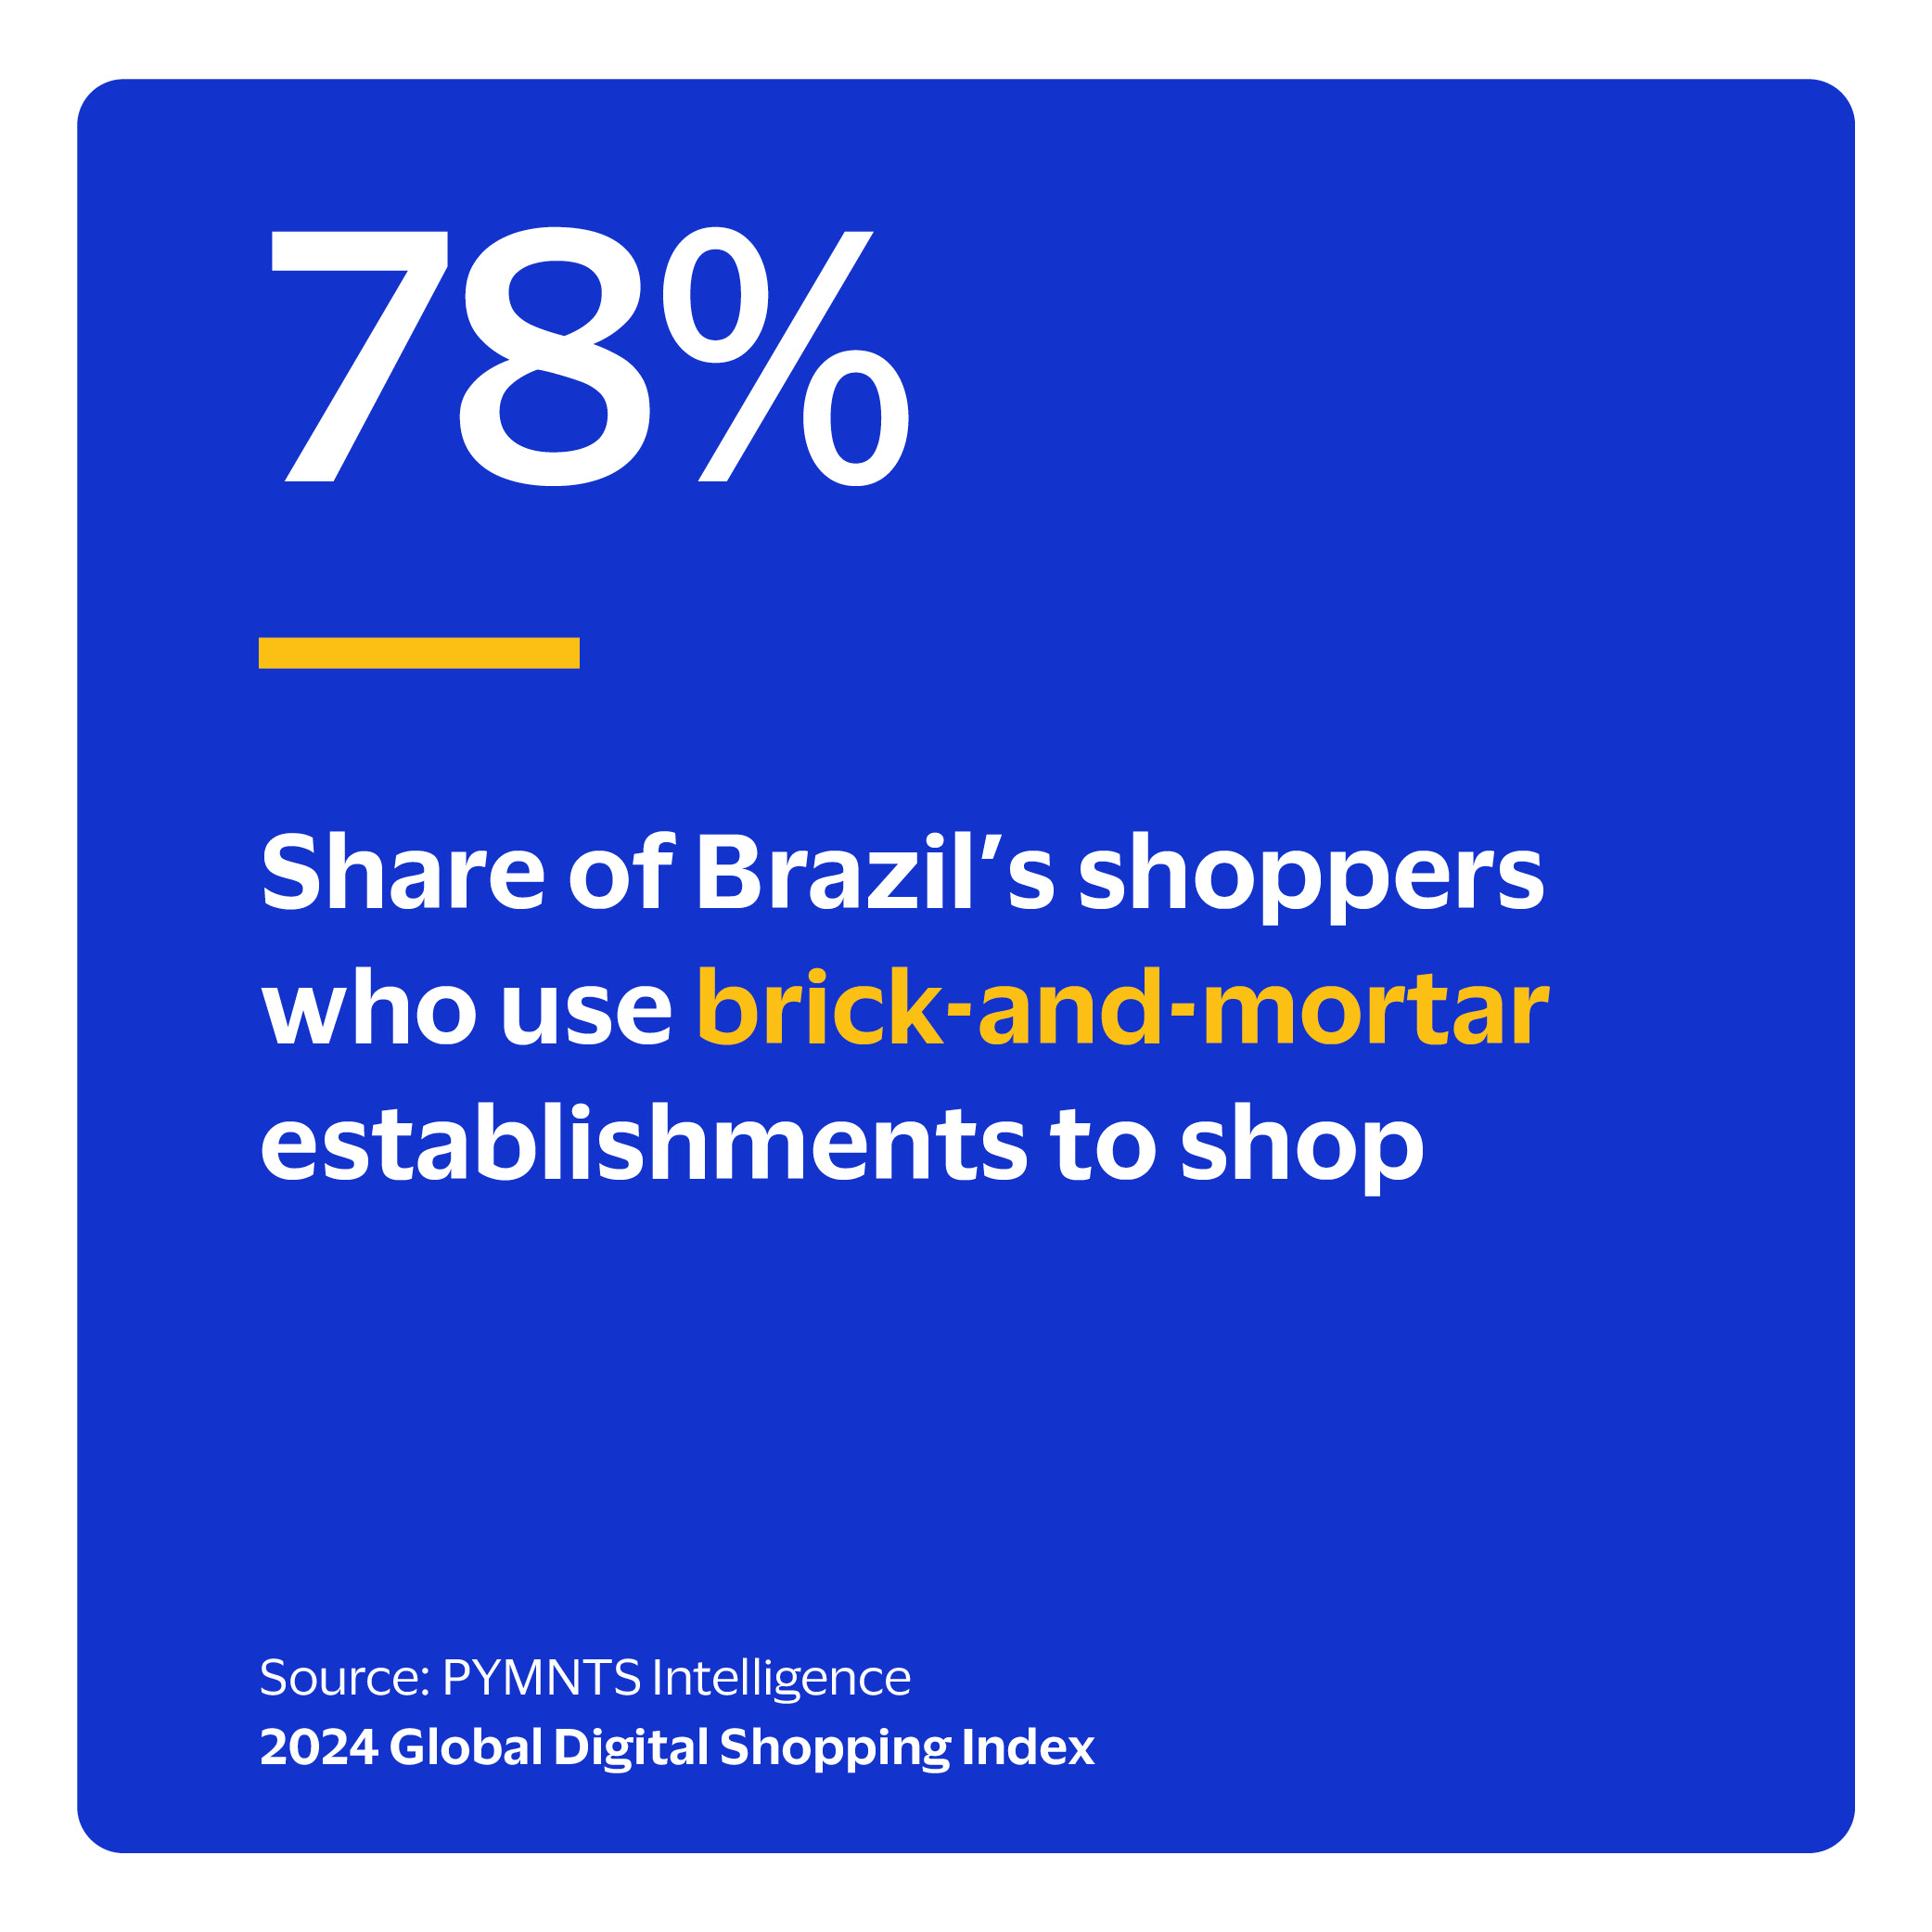 78%: Share of Brazil’s shoppers who use brick-and-mortar establishments to shop